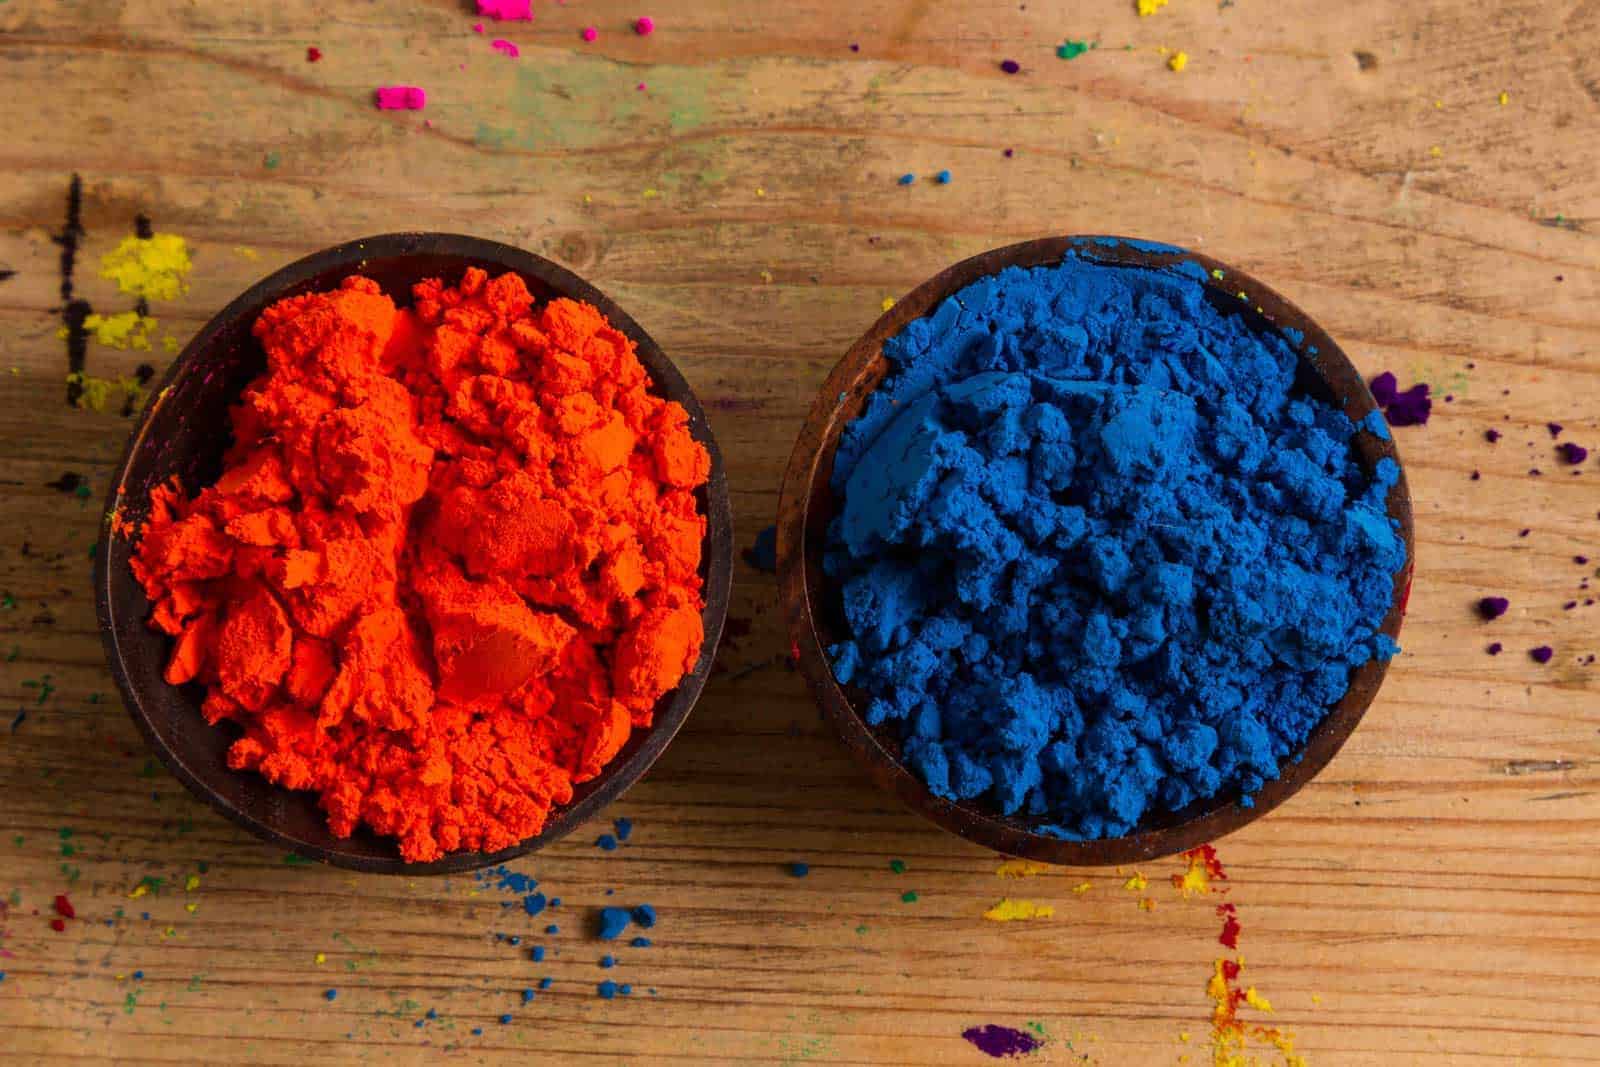 Real world example of complementary colours: Indian pigments in orange and blue.